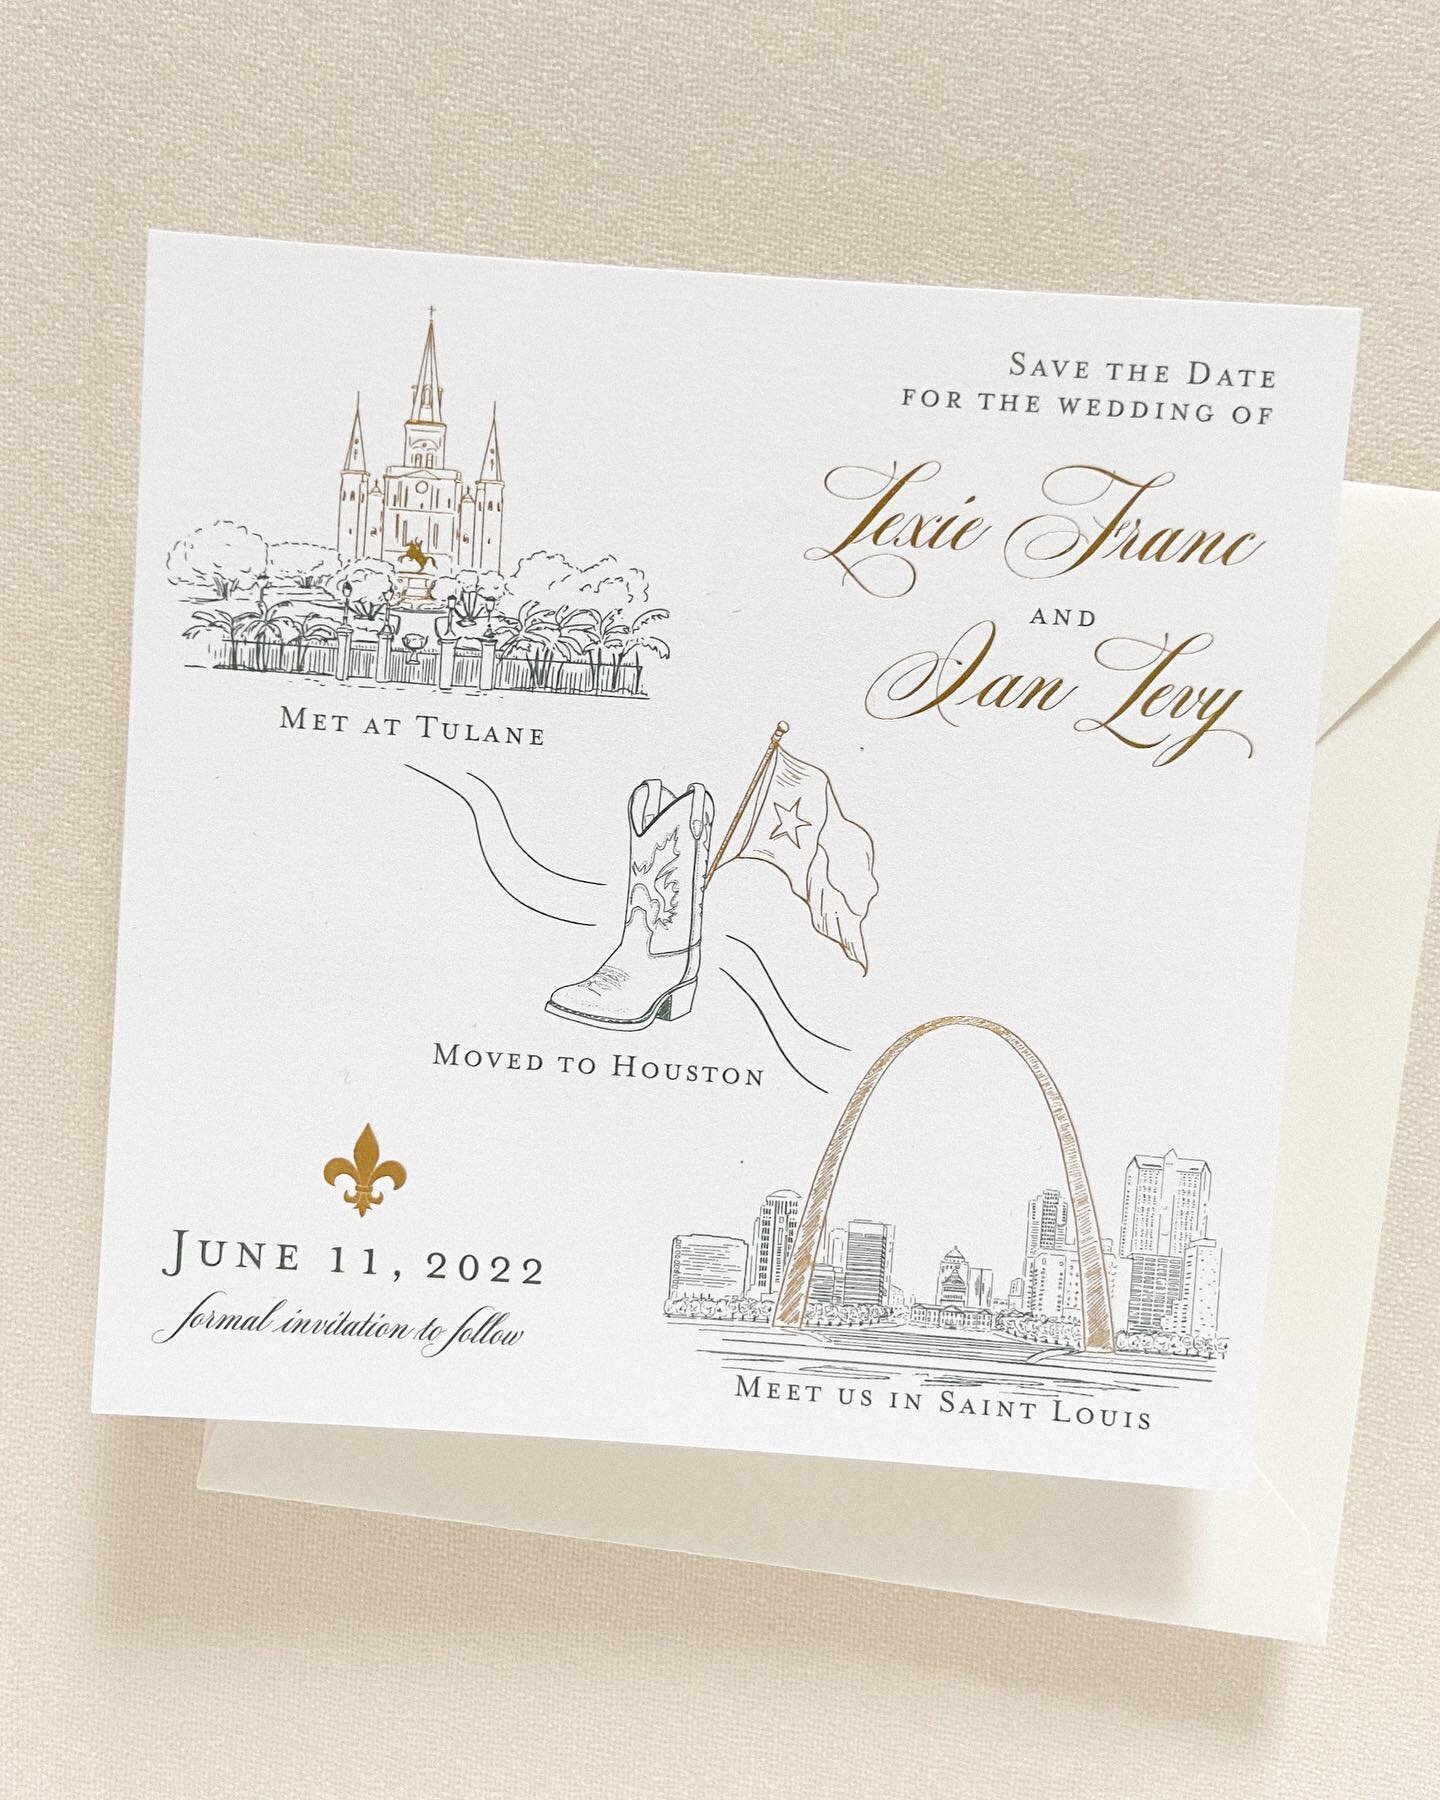 Lexie and Ian&rsquo;s saves shared their journey from from where they met to their big day 💍💕
Planning @kristinashleyevents 
.
.
#savethedate #stlwedding #2023bride #ohsobeautifulpaper #dailydoseofpaper #letterpressstudio #luxurystationery #wedding